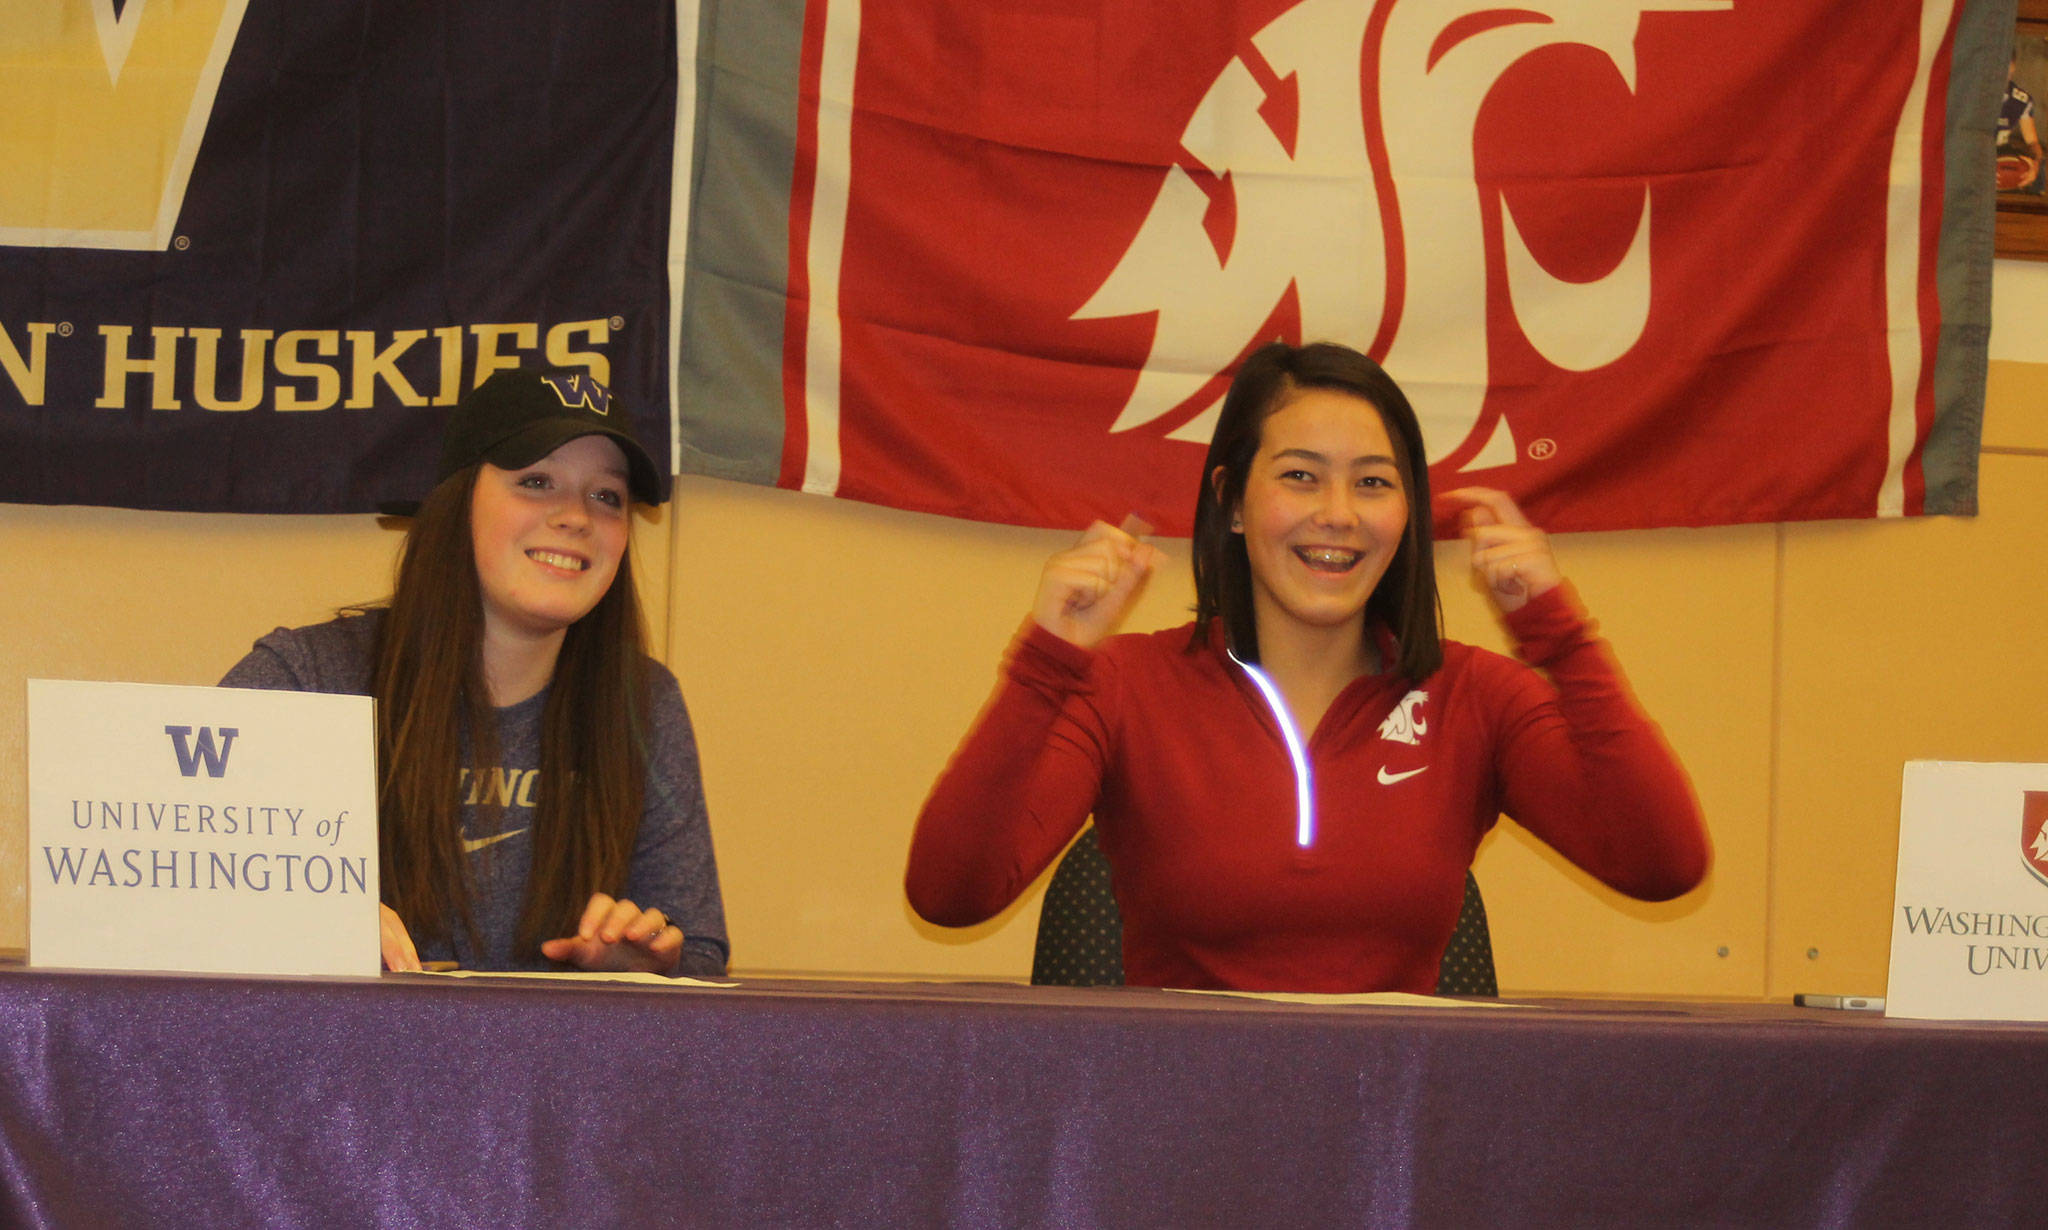 Olivia Tungate, right, celebrates after signing a letter of intent to swim for Washington State University. Jillian Pape, left, will row for the University of Washington. (Photo by Jim Waller/Whidbey News-Times)